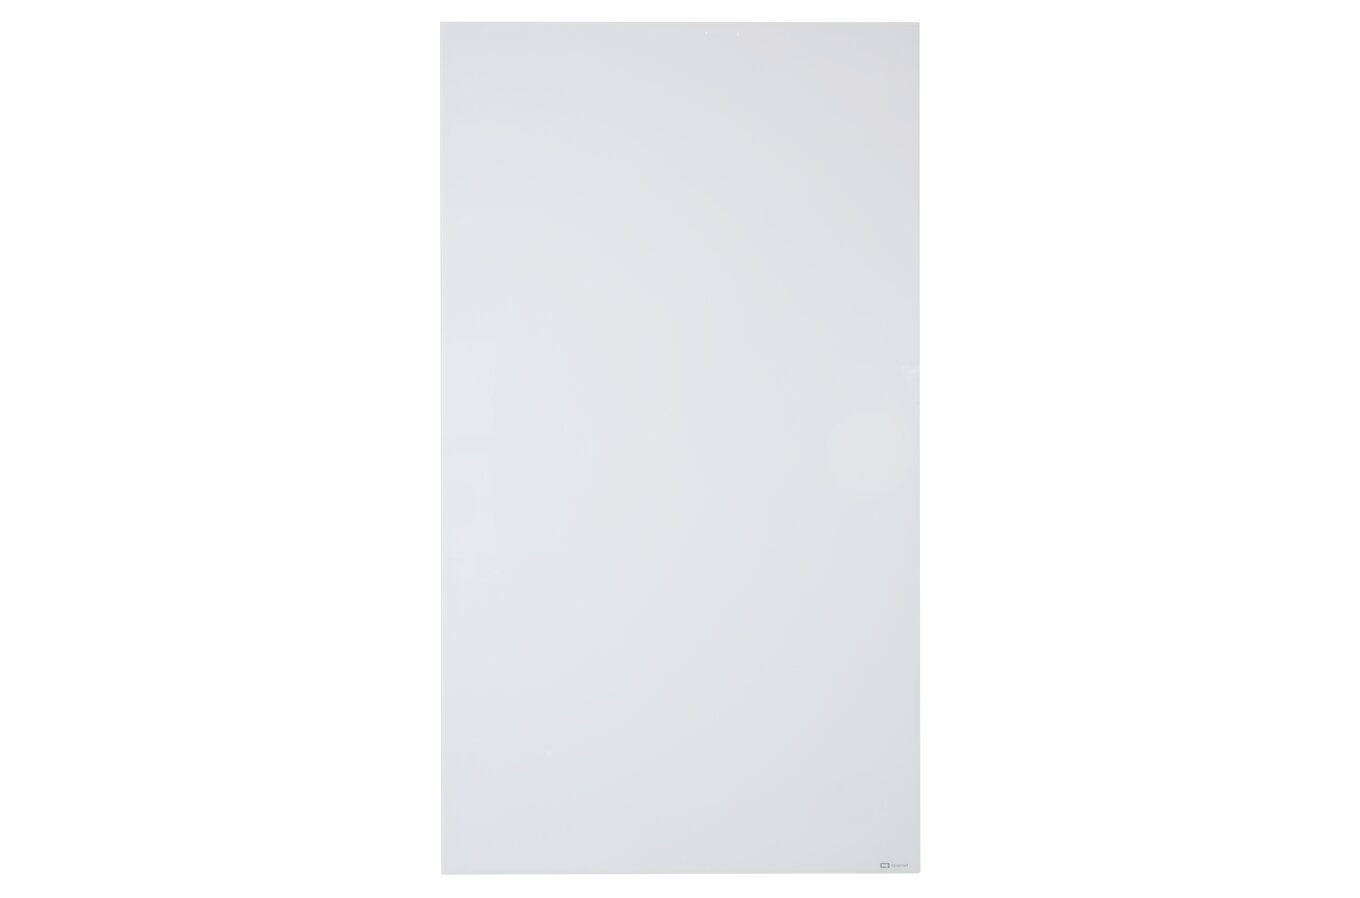 9 x 12 Double Magnetized Dry Erase Sheets - Discount Magnet